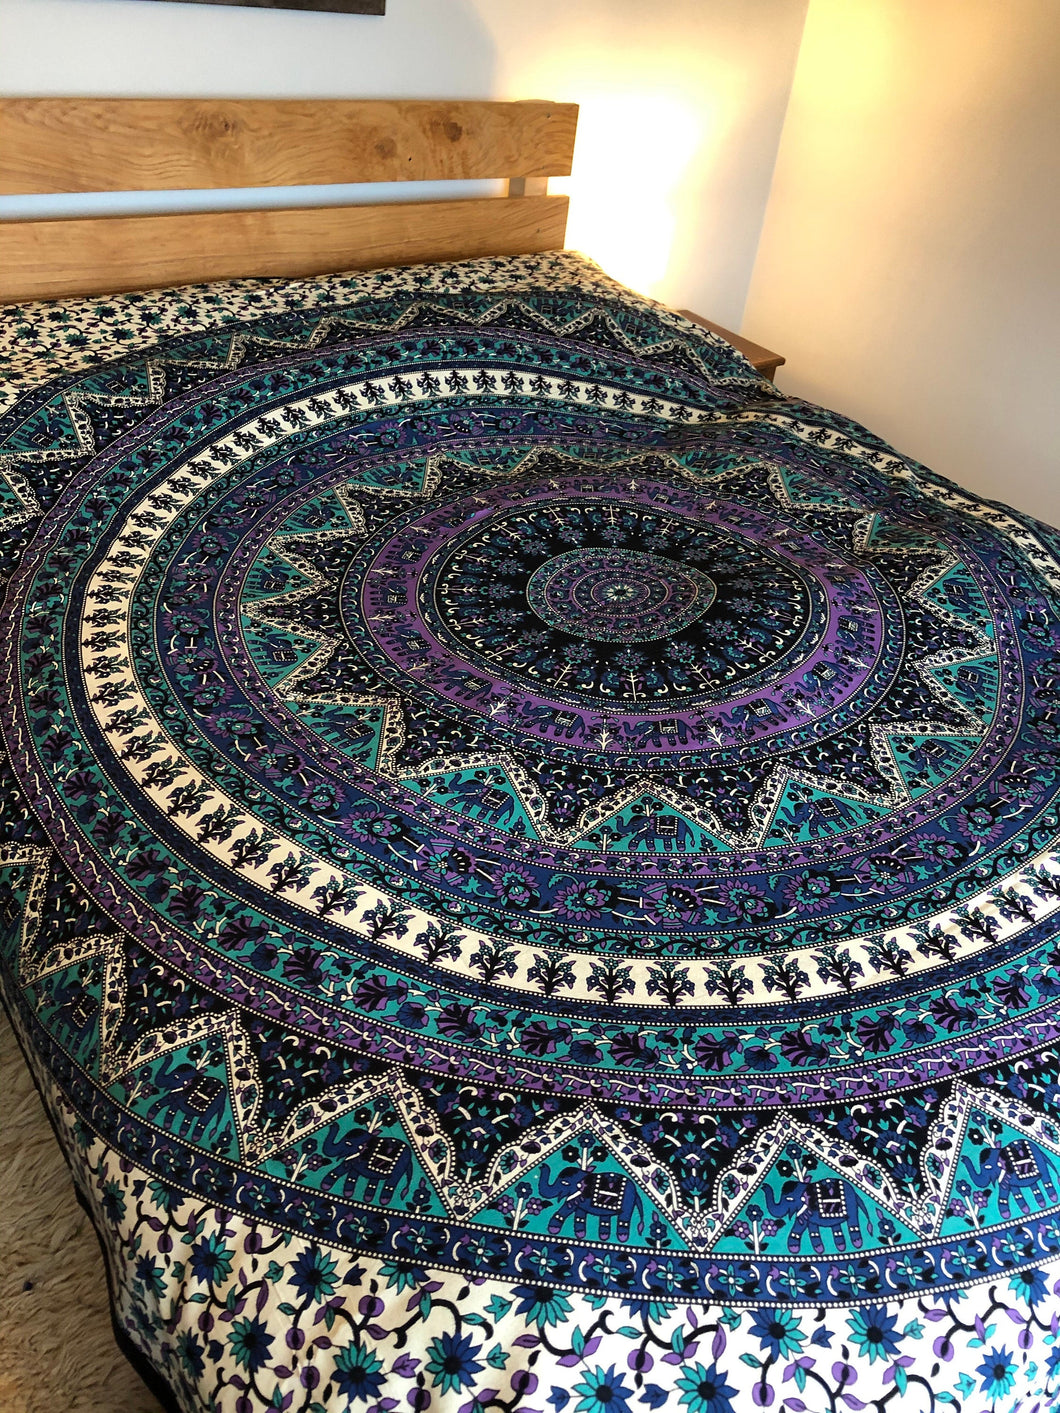 Emma's Emporium mandala cotton bedspread. Beautiful ethnic Indian elephant bedspread, wall hanging or throw. Made with love in India.